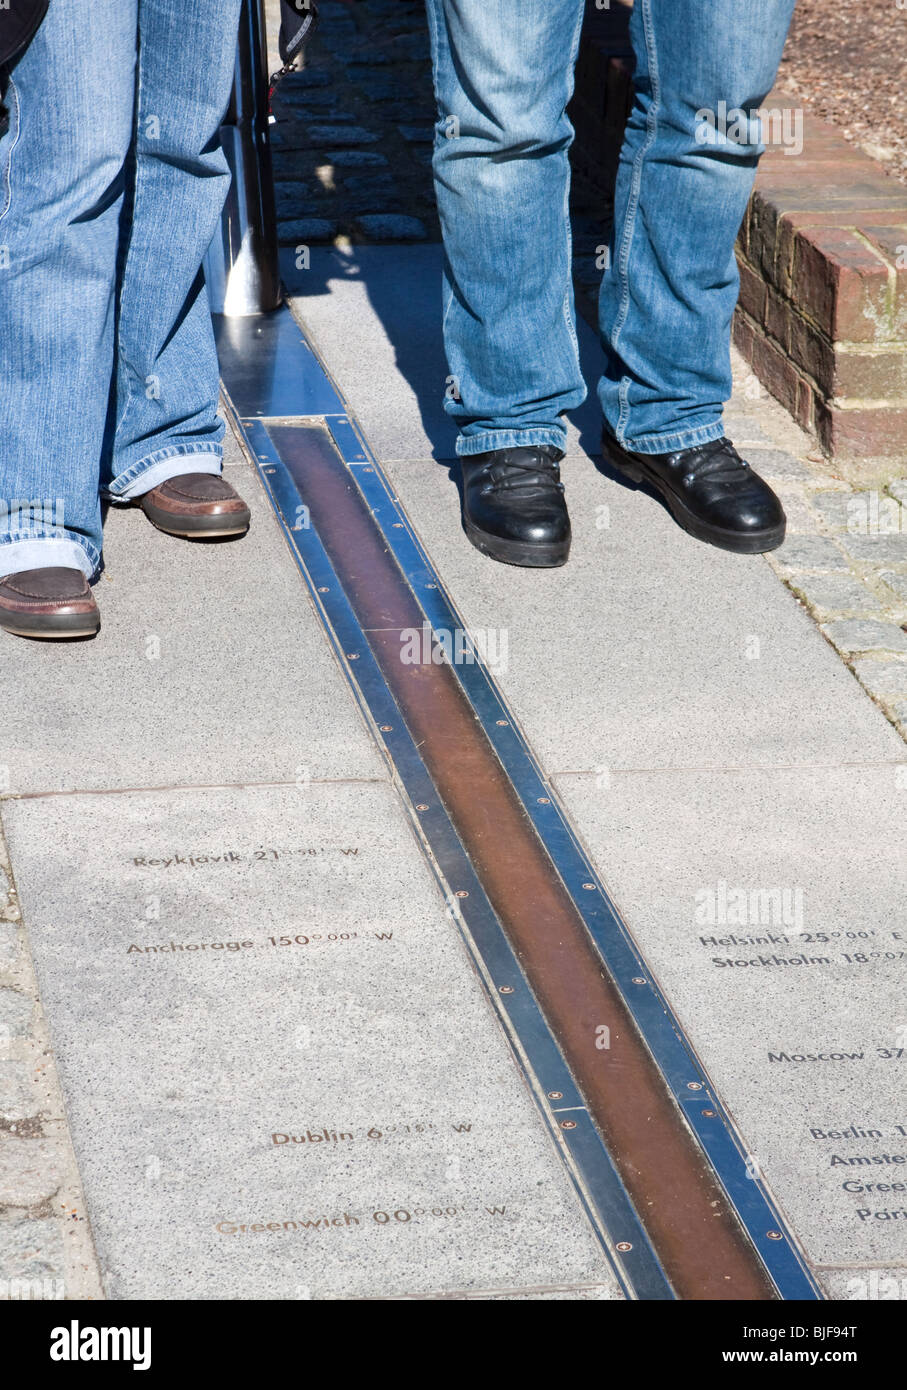 Tourists on the Greenwich Prime Meridian Line 0 Degrees Longitude Stock Photo